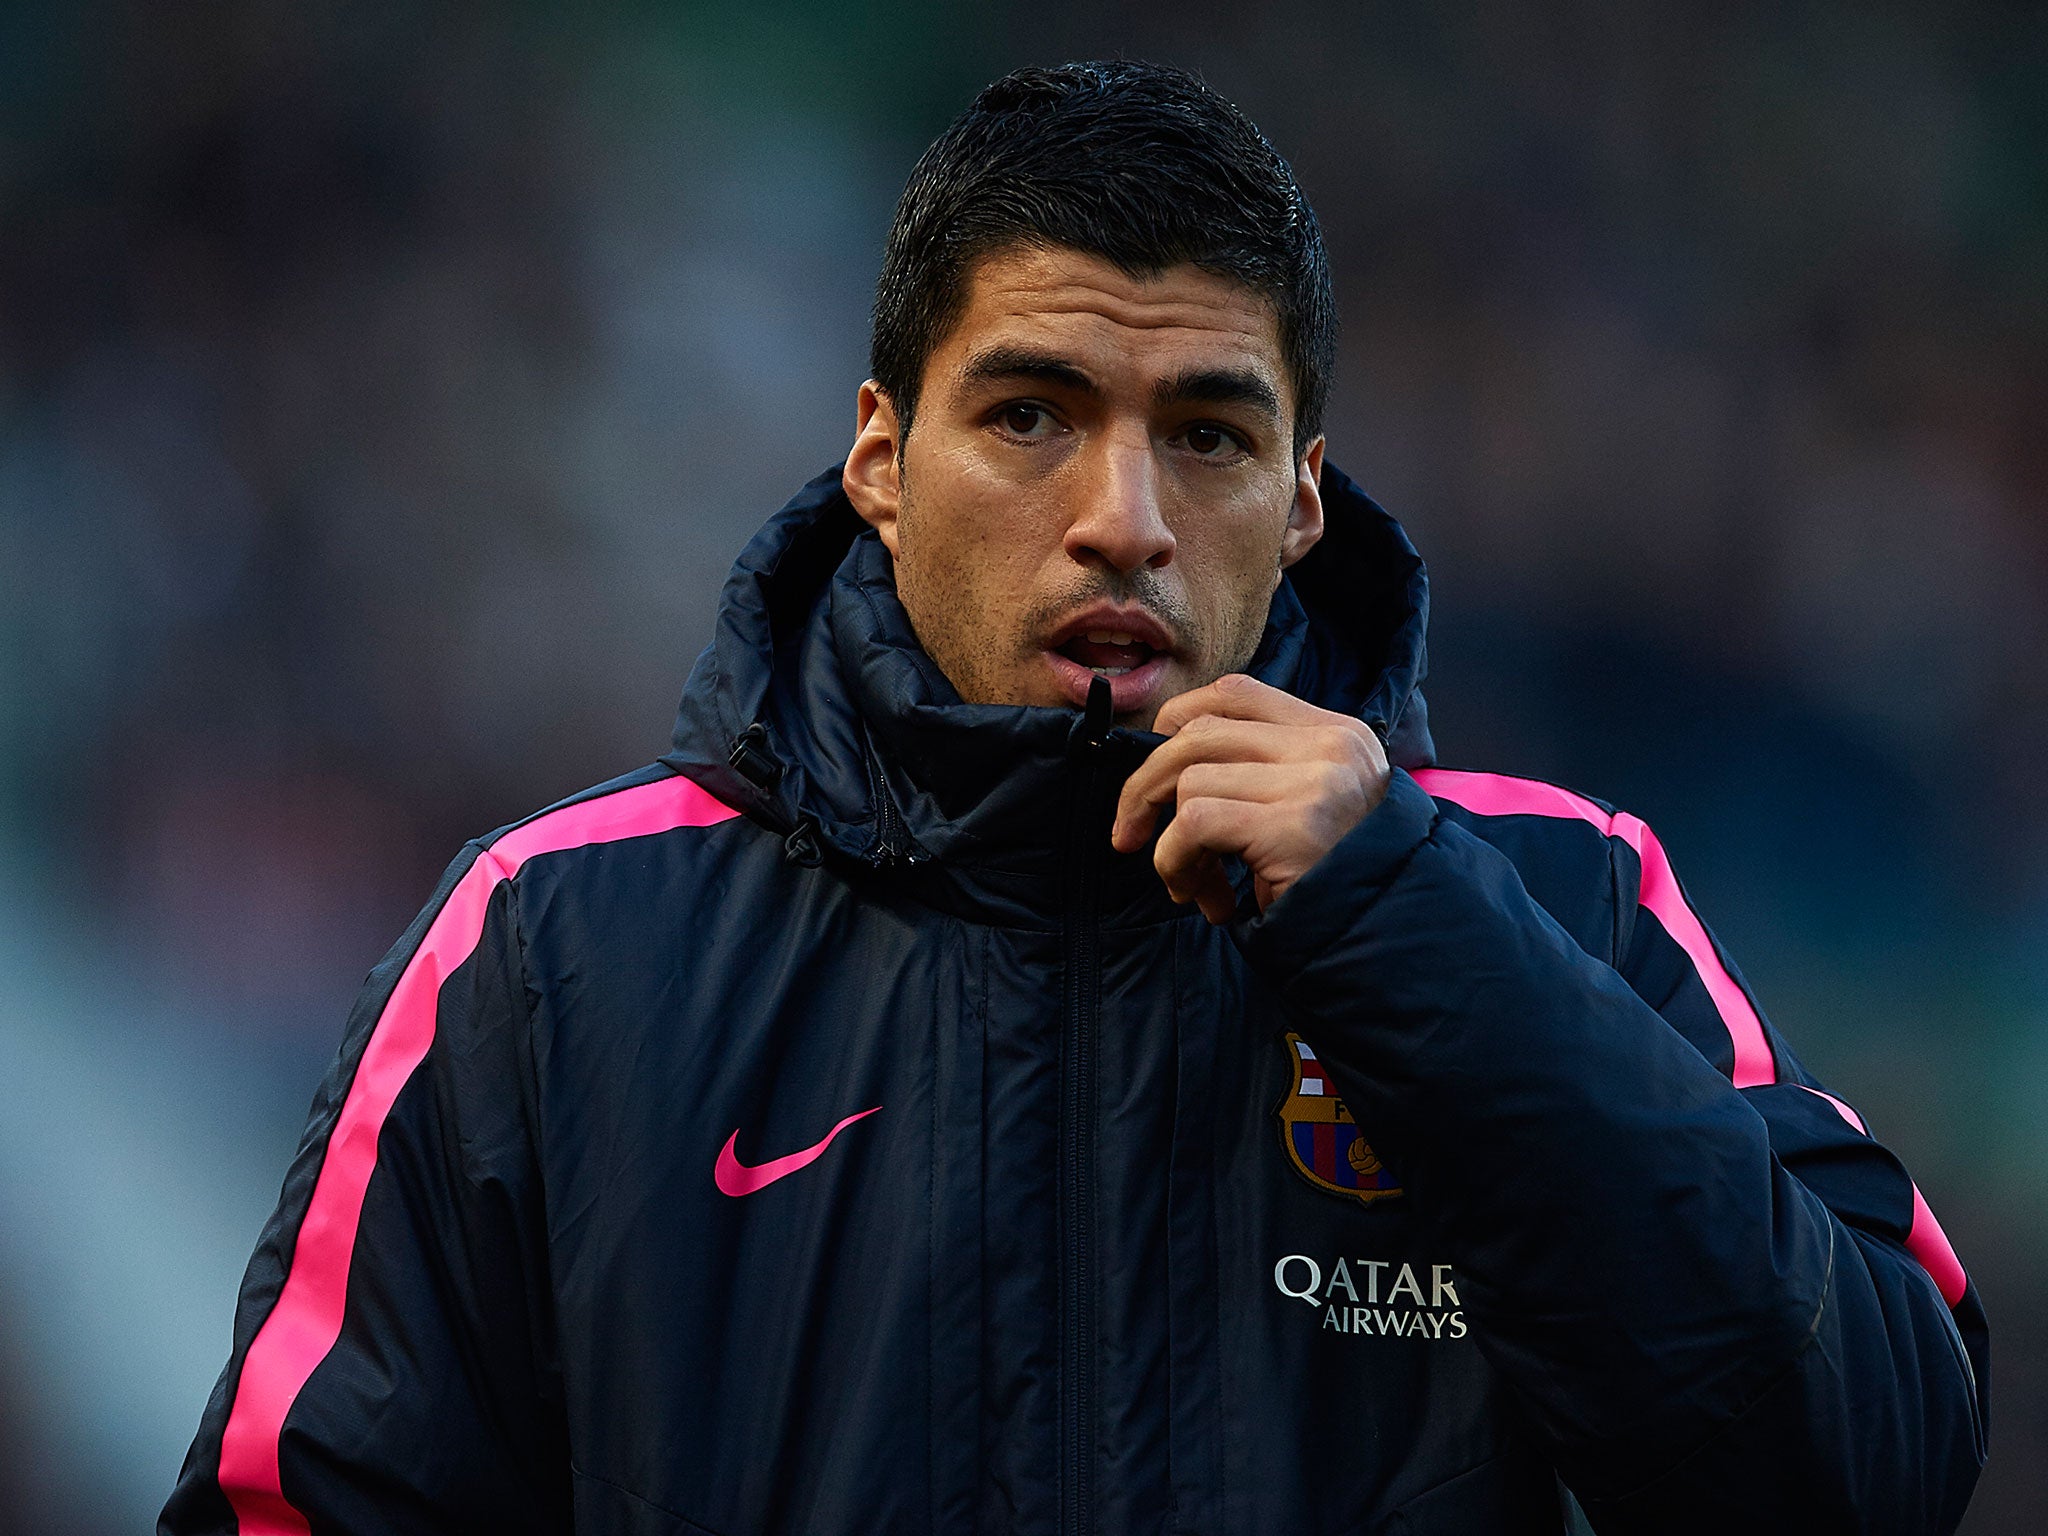 Is Luis Suarez going to join Arsenal in the summer?